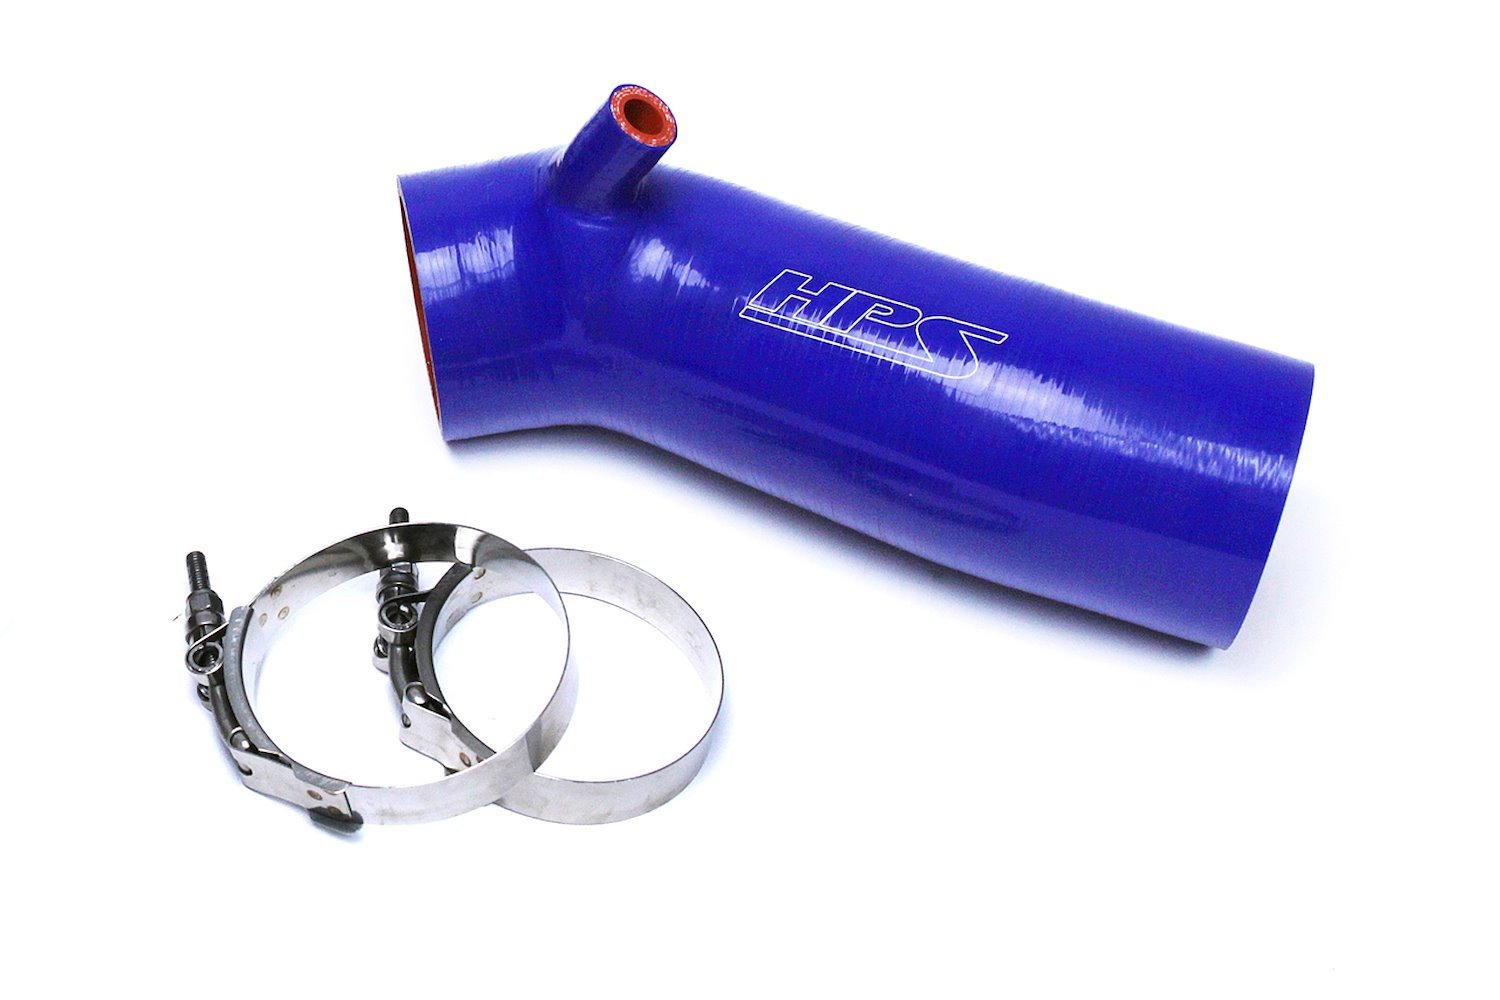 57-1445-BLUE Silicone Air Intake, Replace Stock Restrictive Air Intake, Improve Throttle Response, No Heat Soak